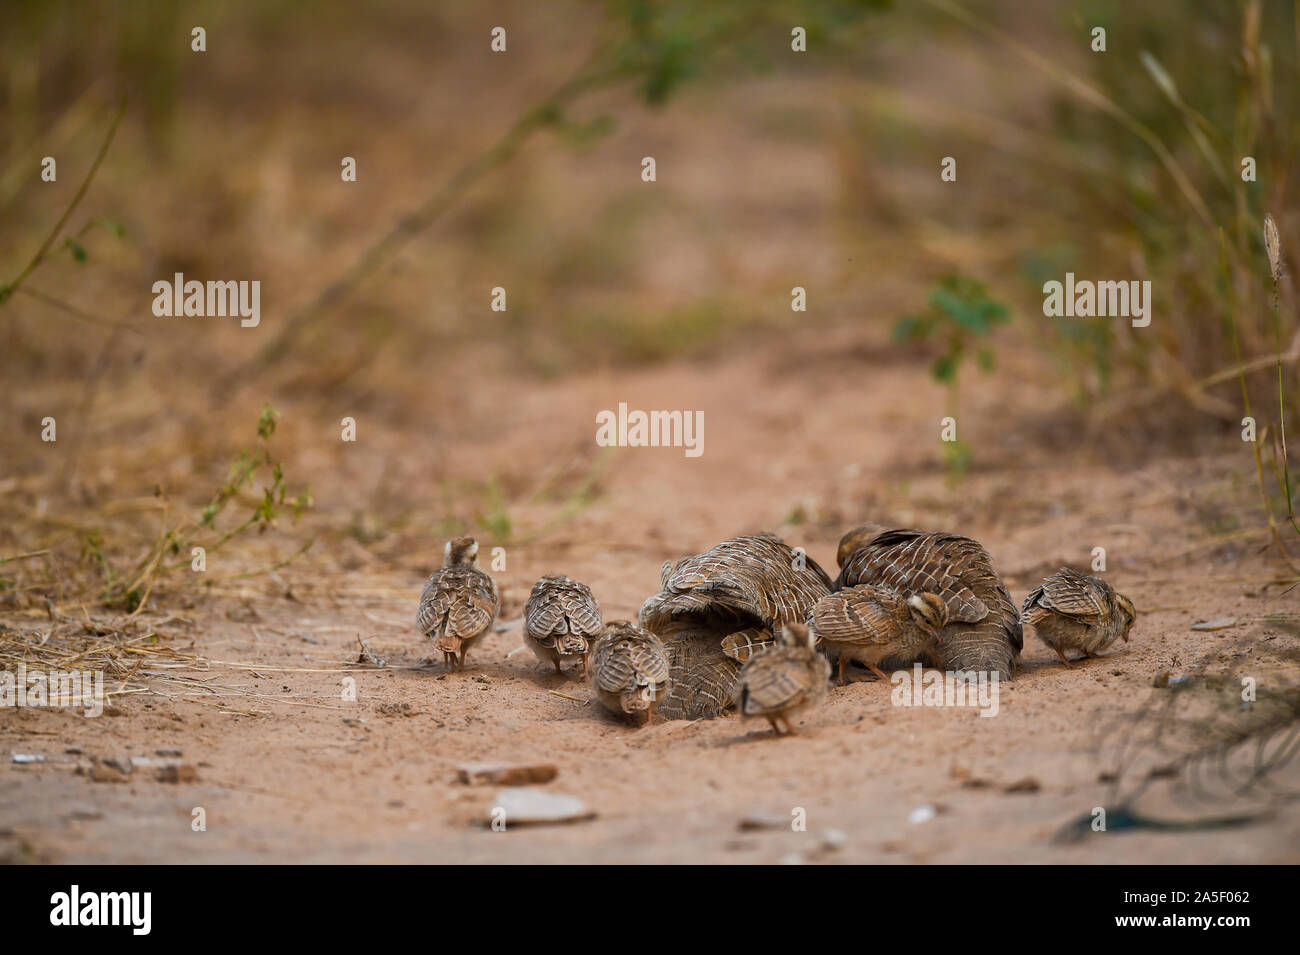 grey francolin or grey partridge or Francolinus pondicerianus family with chicks walking together on jungle track at Ranthambore national park, india Stock Photo